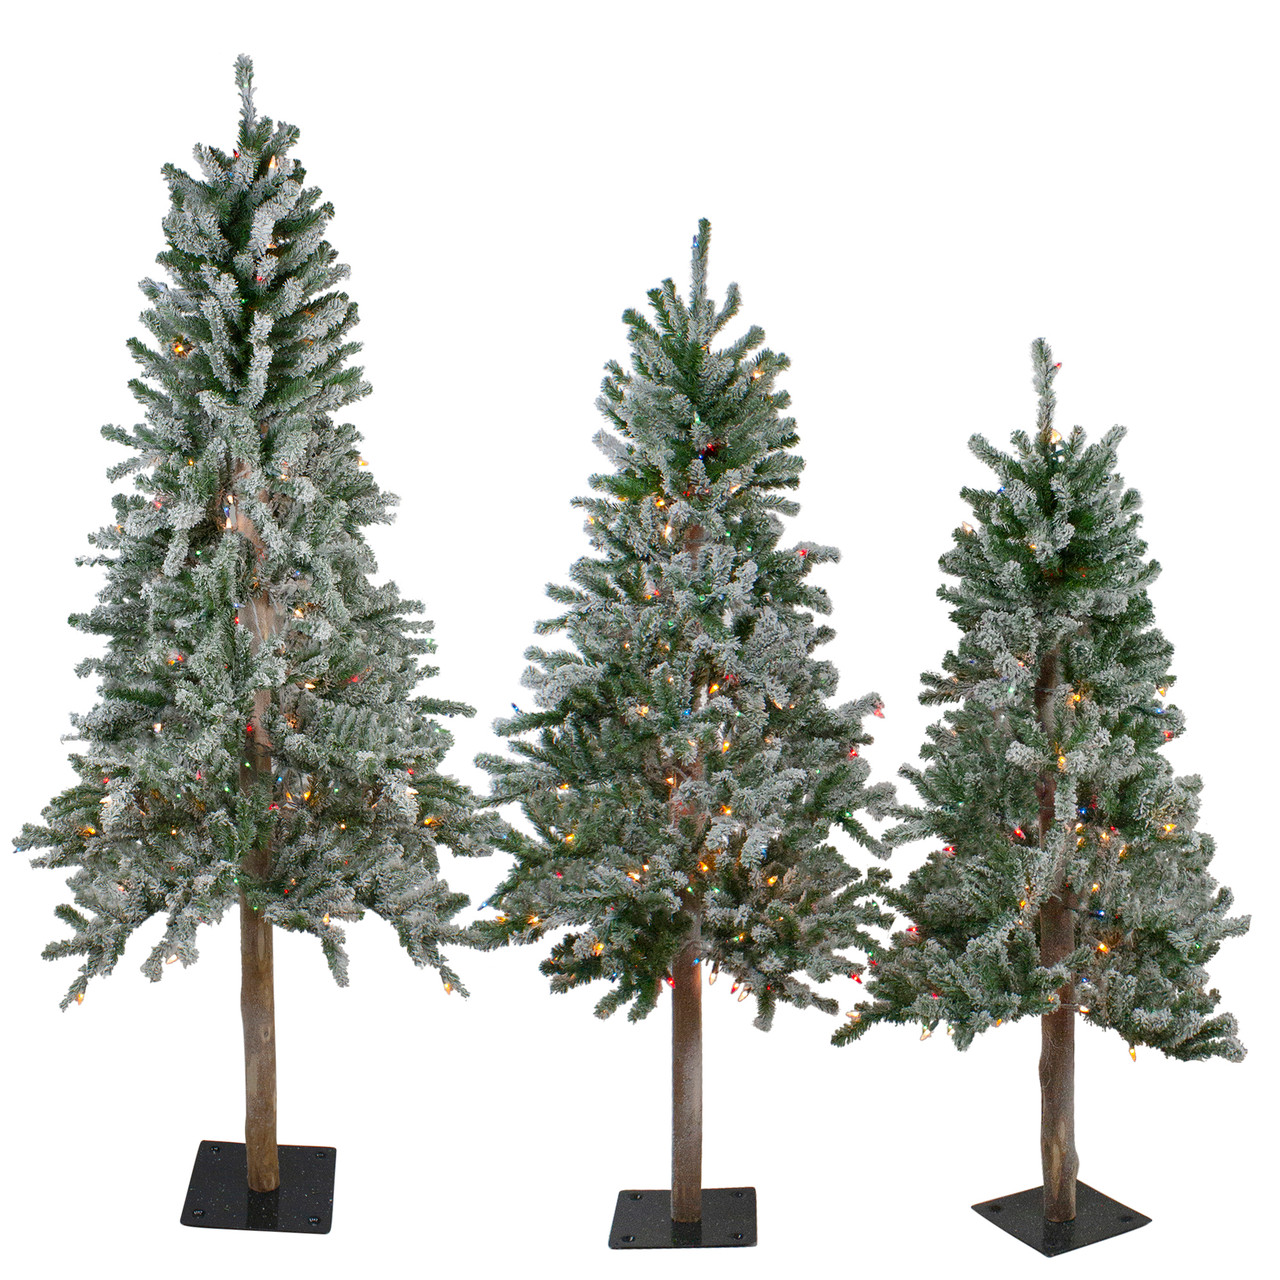 5 Facts About Flocked Christmas Trees - Christmas Central